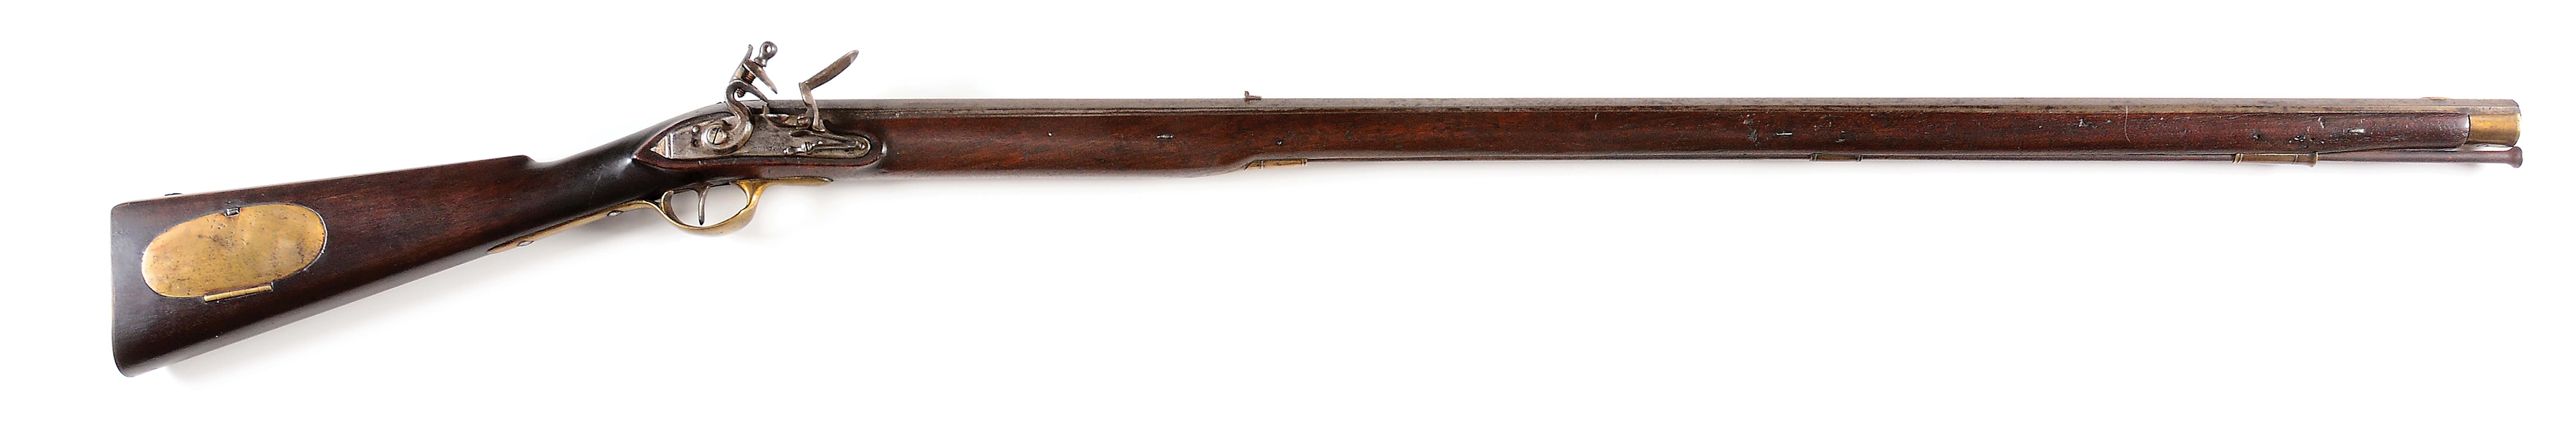 (A) SCARCE 1814 TRYON MADE "CP" MARKED FLINTLOCK RIFLE.